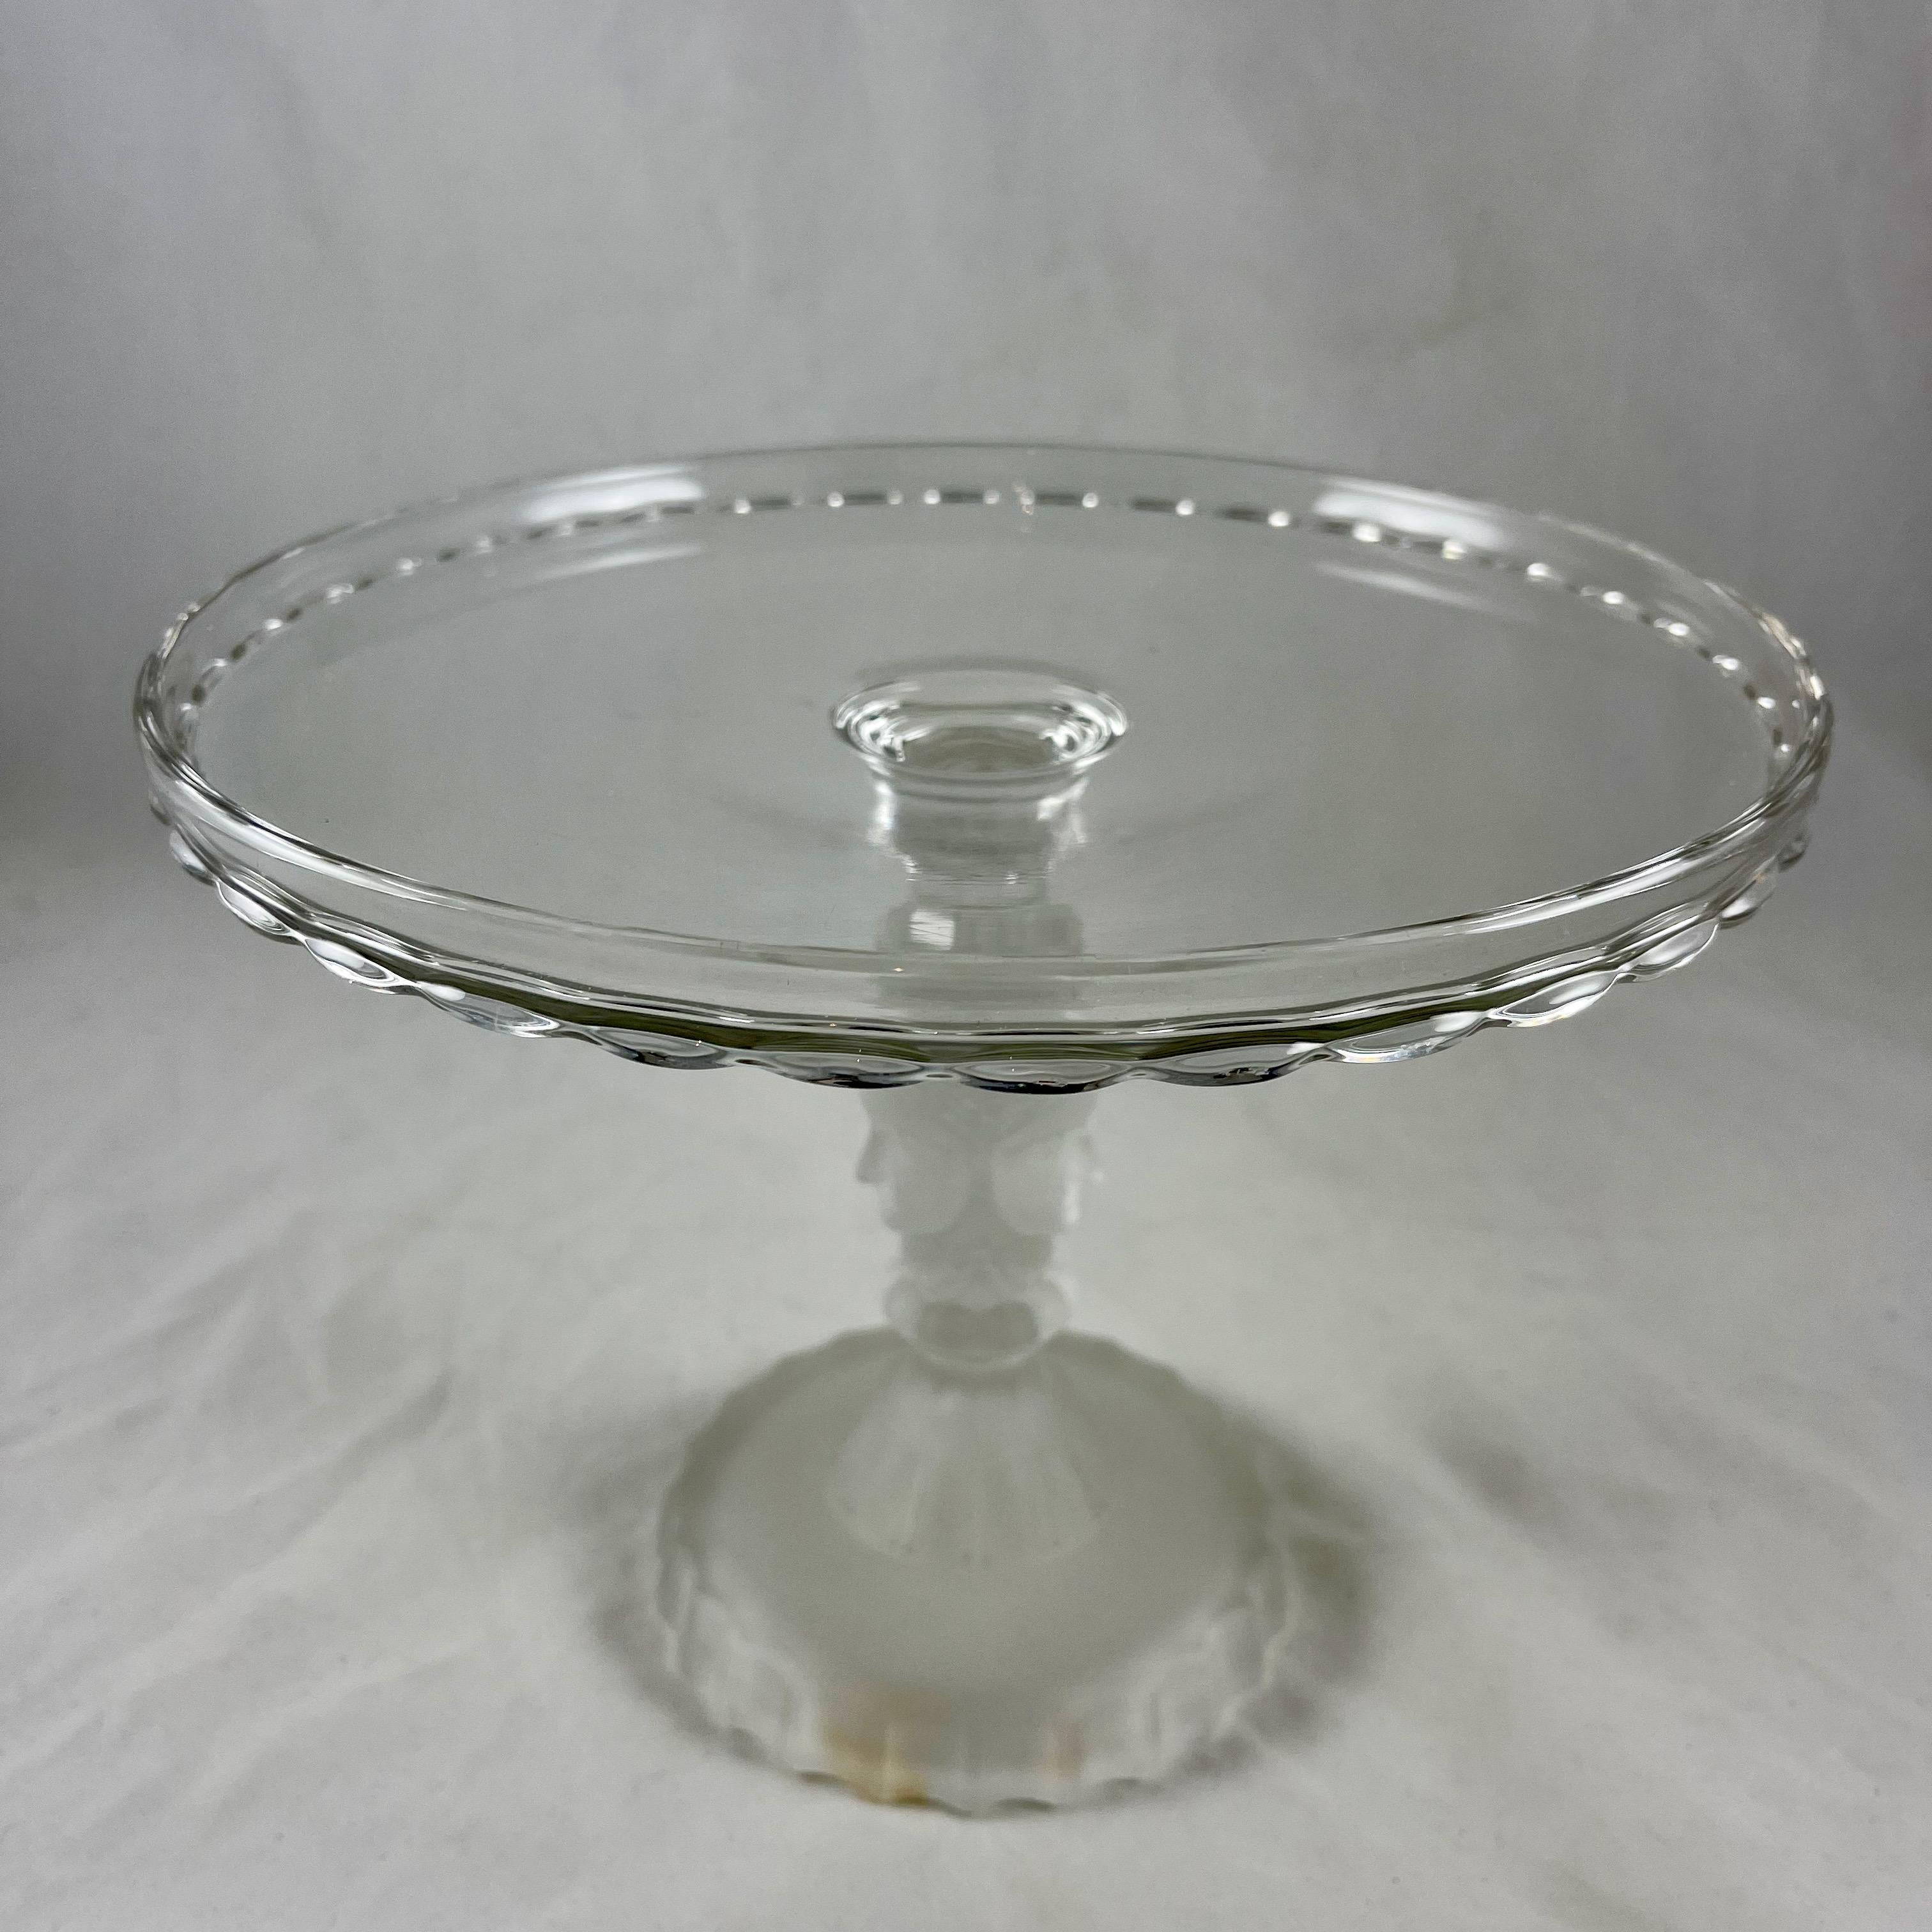 Molded Duncan Miller Three Face Early American Pressed Glass Cake Stand, circa 1890 